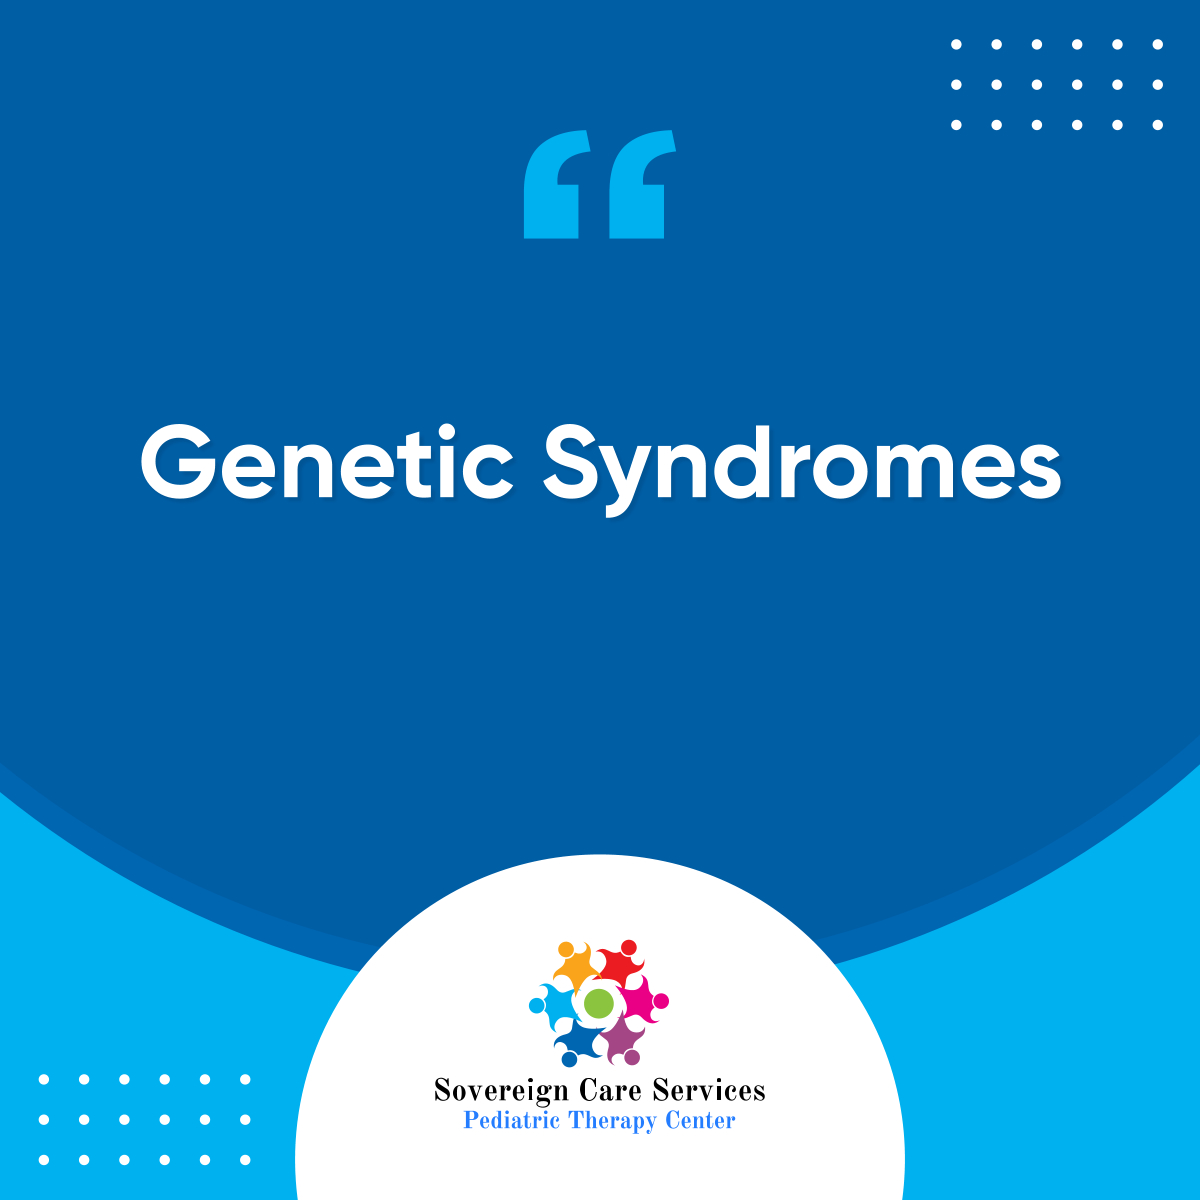 Down Syndrome causes developmental and intellectual delays whereas Muscular Dystrophy impacts muscle mass and strength. For immediate intervention, contact us and schedule your child’s physical therapy under our care. Get in touch!

#GeneticSyndromes #DownSyndrome